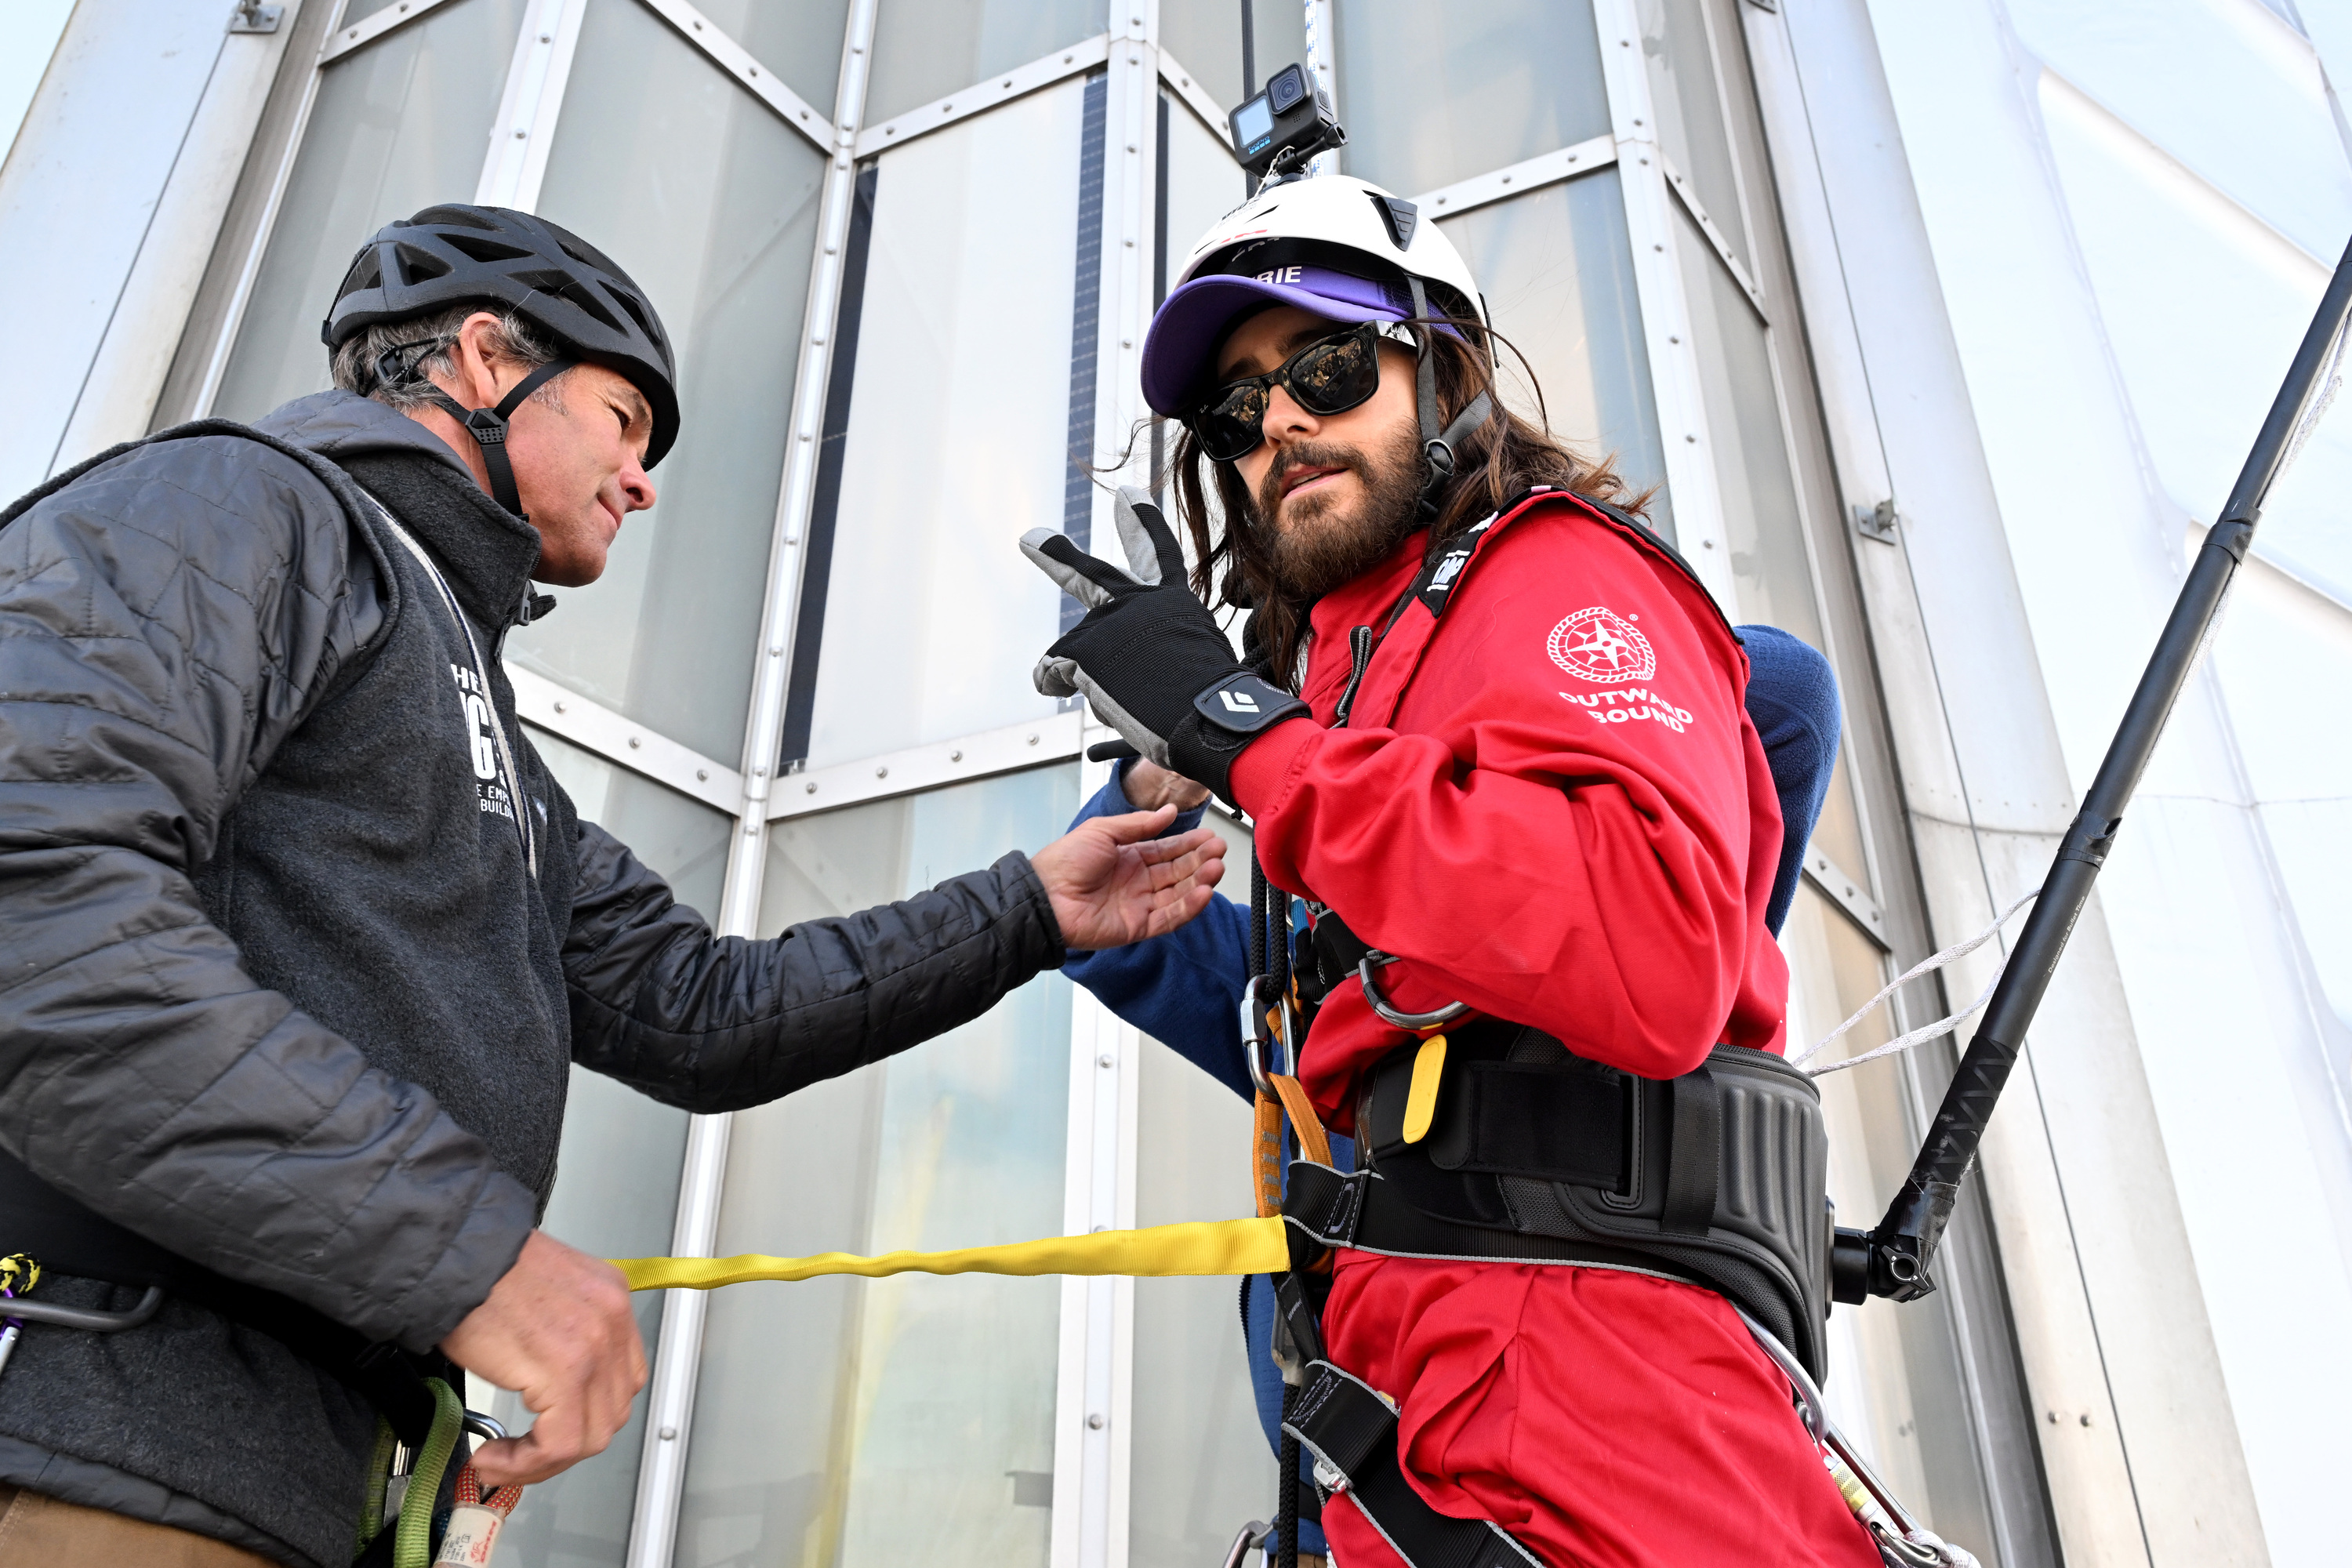 Video: Watch Jared Leto rappel down the Empire State Building